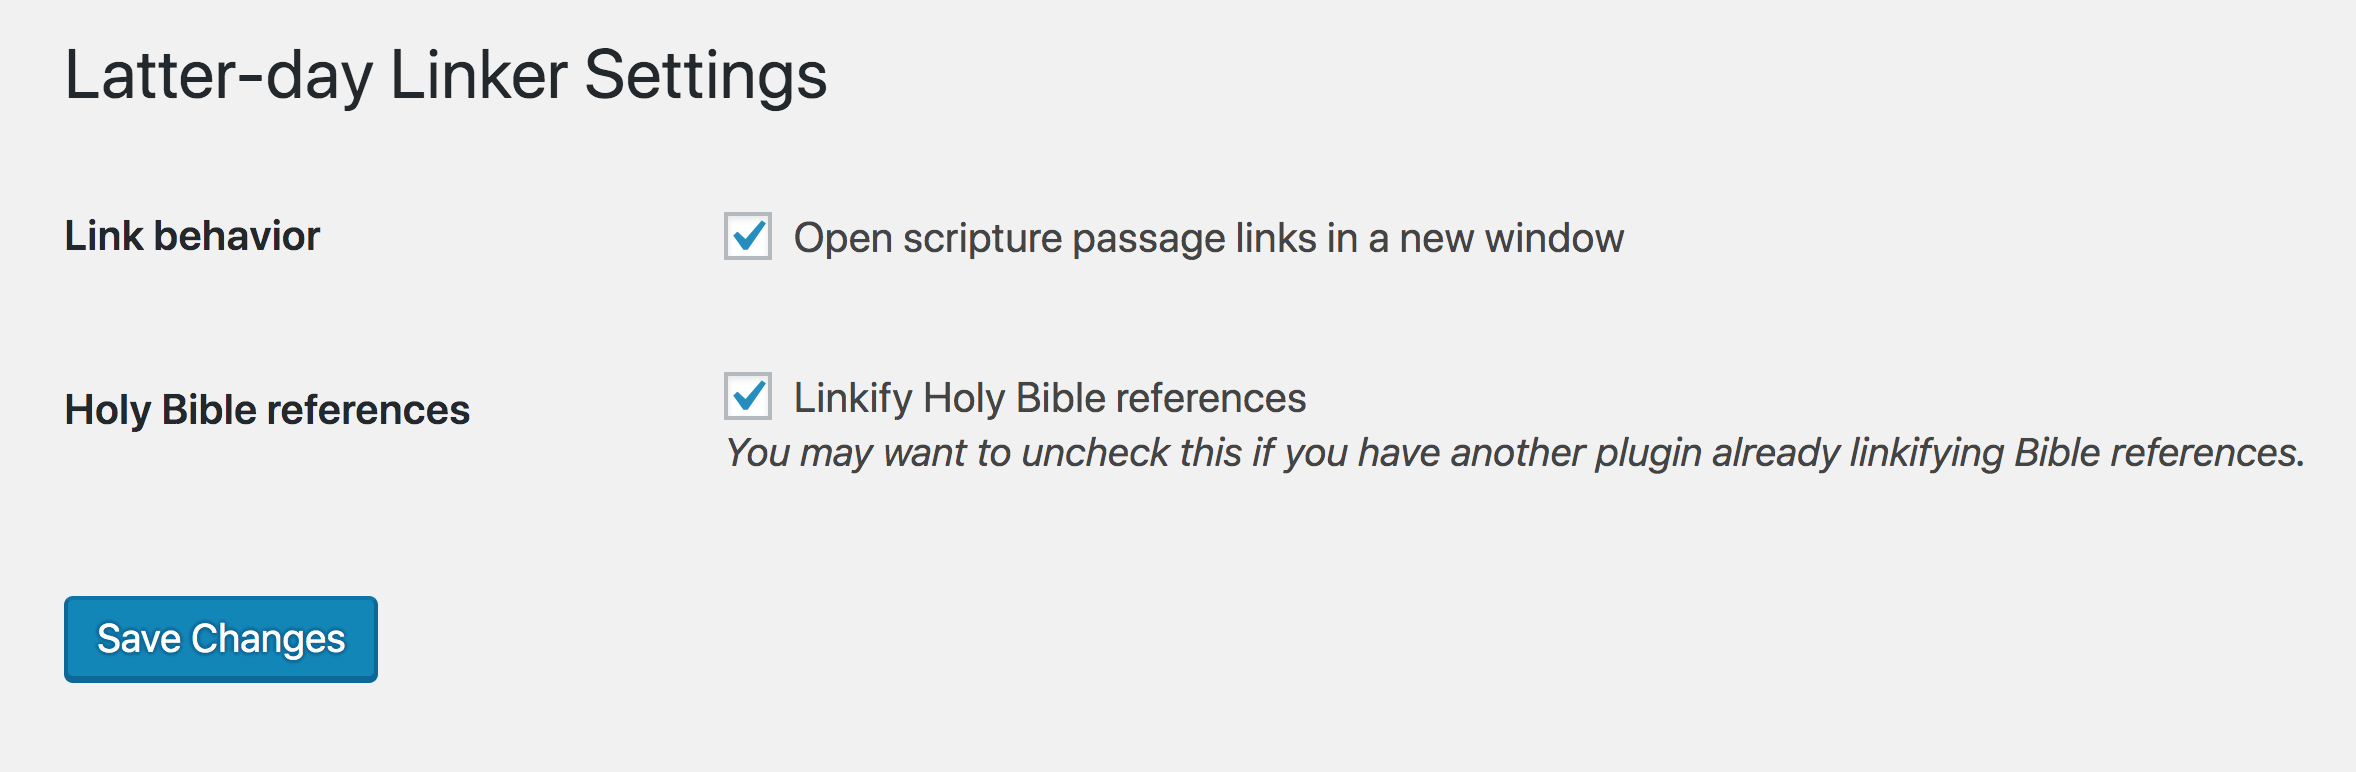 Latter-day Linker settings page.